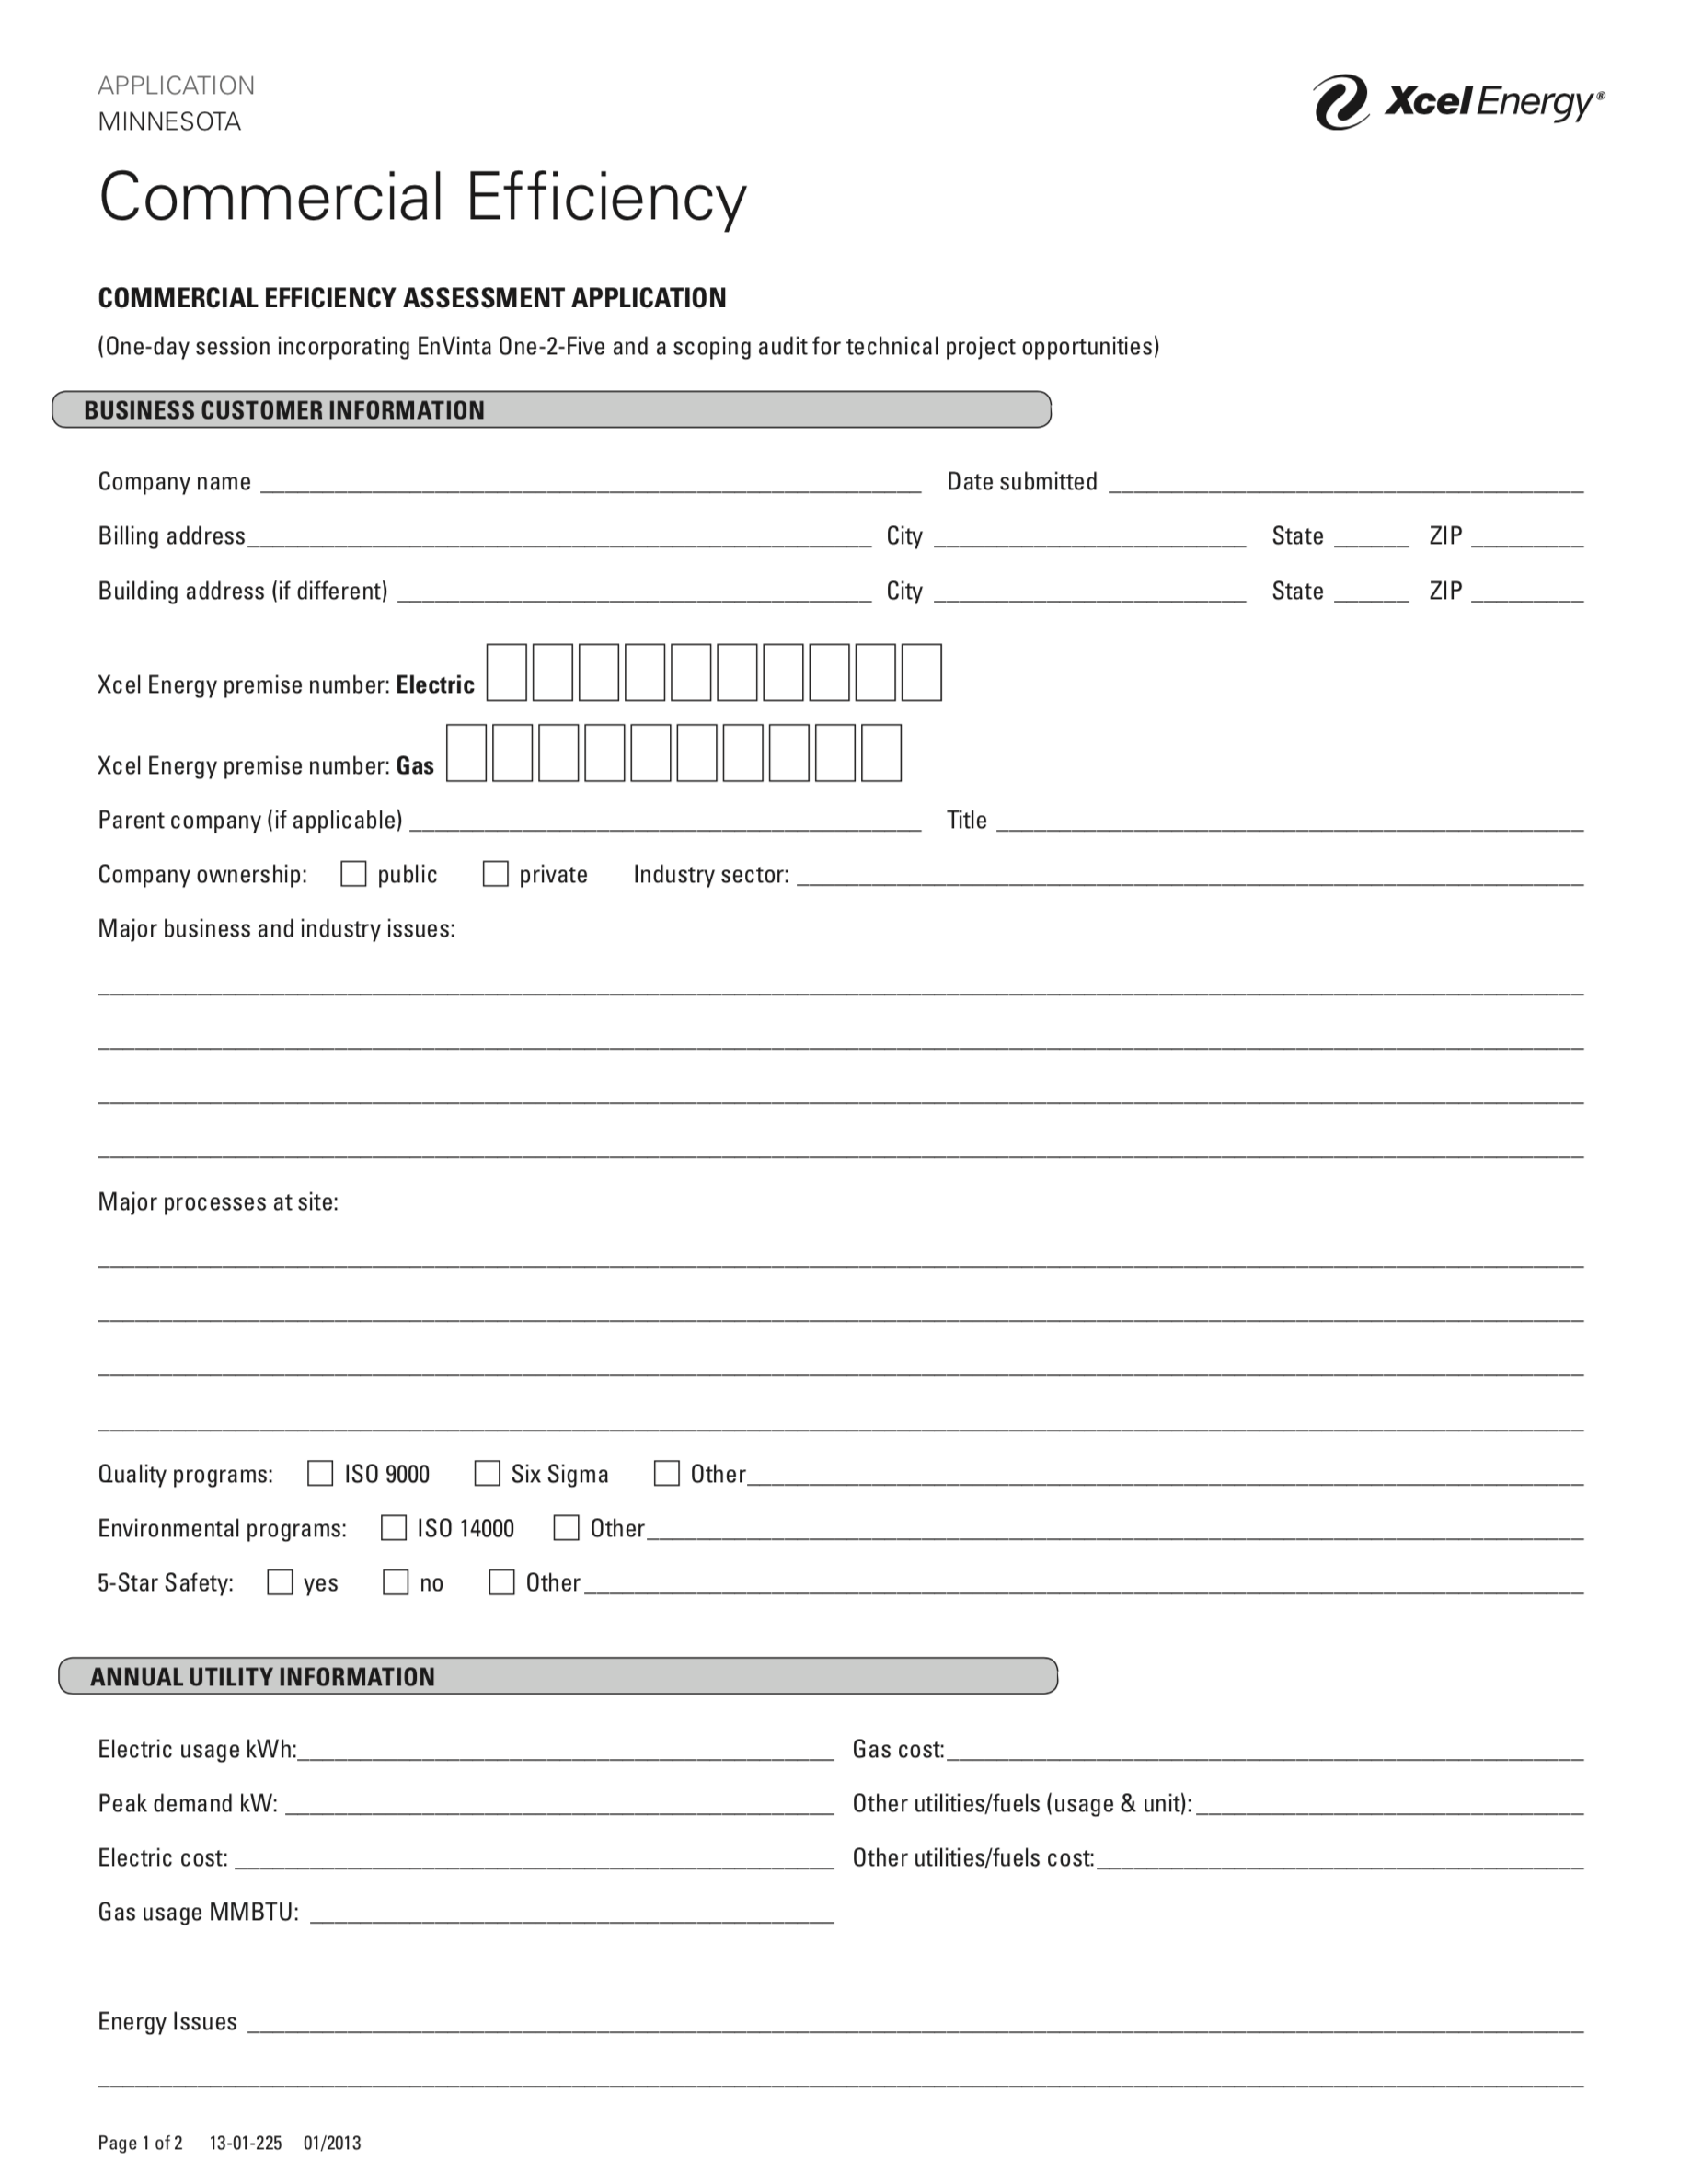 top-pse-rebate-form-templates-free-to-download-in-pdf-format